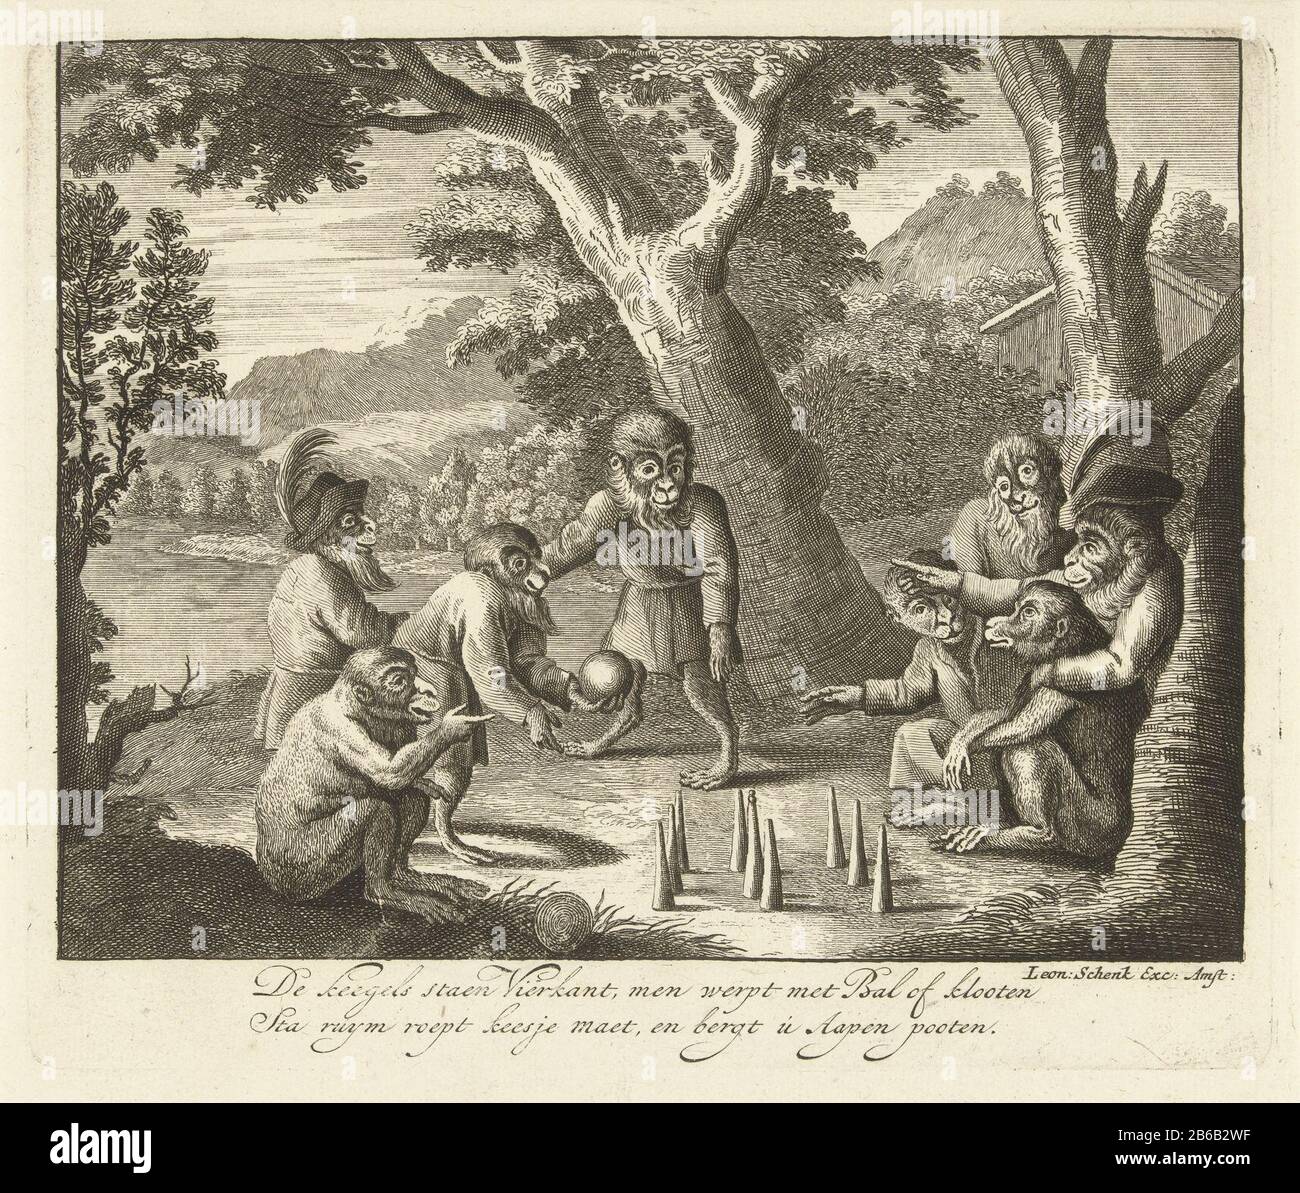 Monkeys play the bowling game Monkeys Game in the world (series title) 't Aapenspel in Werelt (series title) Monkeys playing skittles. Part of a series consisting of a title picture with 16 unnumbered plates ca. 1720 Where: in monkeys and humans figure in all sorts of scenes from everyday life. Each print with a two-line verse in onderschrift. Manufacturer : printmaker Leonard Schenk (possible) Publisher: Leonard Schenk (listed property) Place manufacture: Amsterdam Date: 1720 Physical features: etching and engra material: paper Technique: etching / engra (printing process) Dimensions : plate Stock Photo